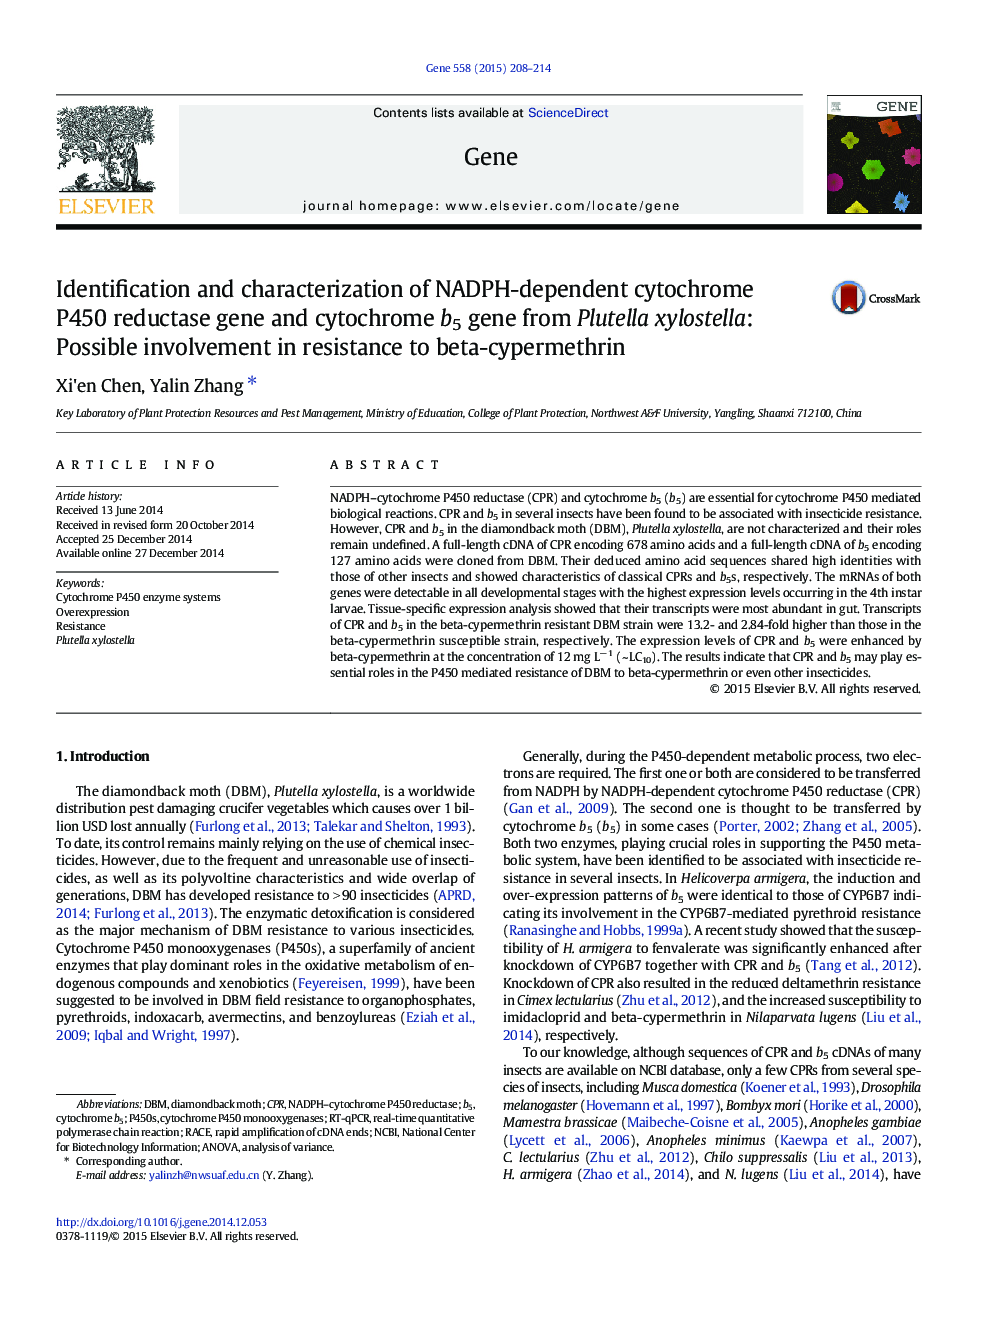 Identification and characterization of NADPH-dependent cytochrome P450 reductase gene and cytochrome b5 gene from Plutella xylostella: Possible involvement in resistance to beta-cypermethrin